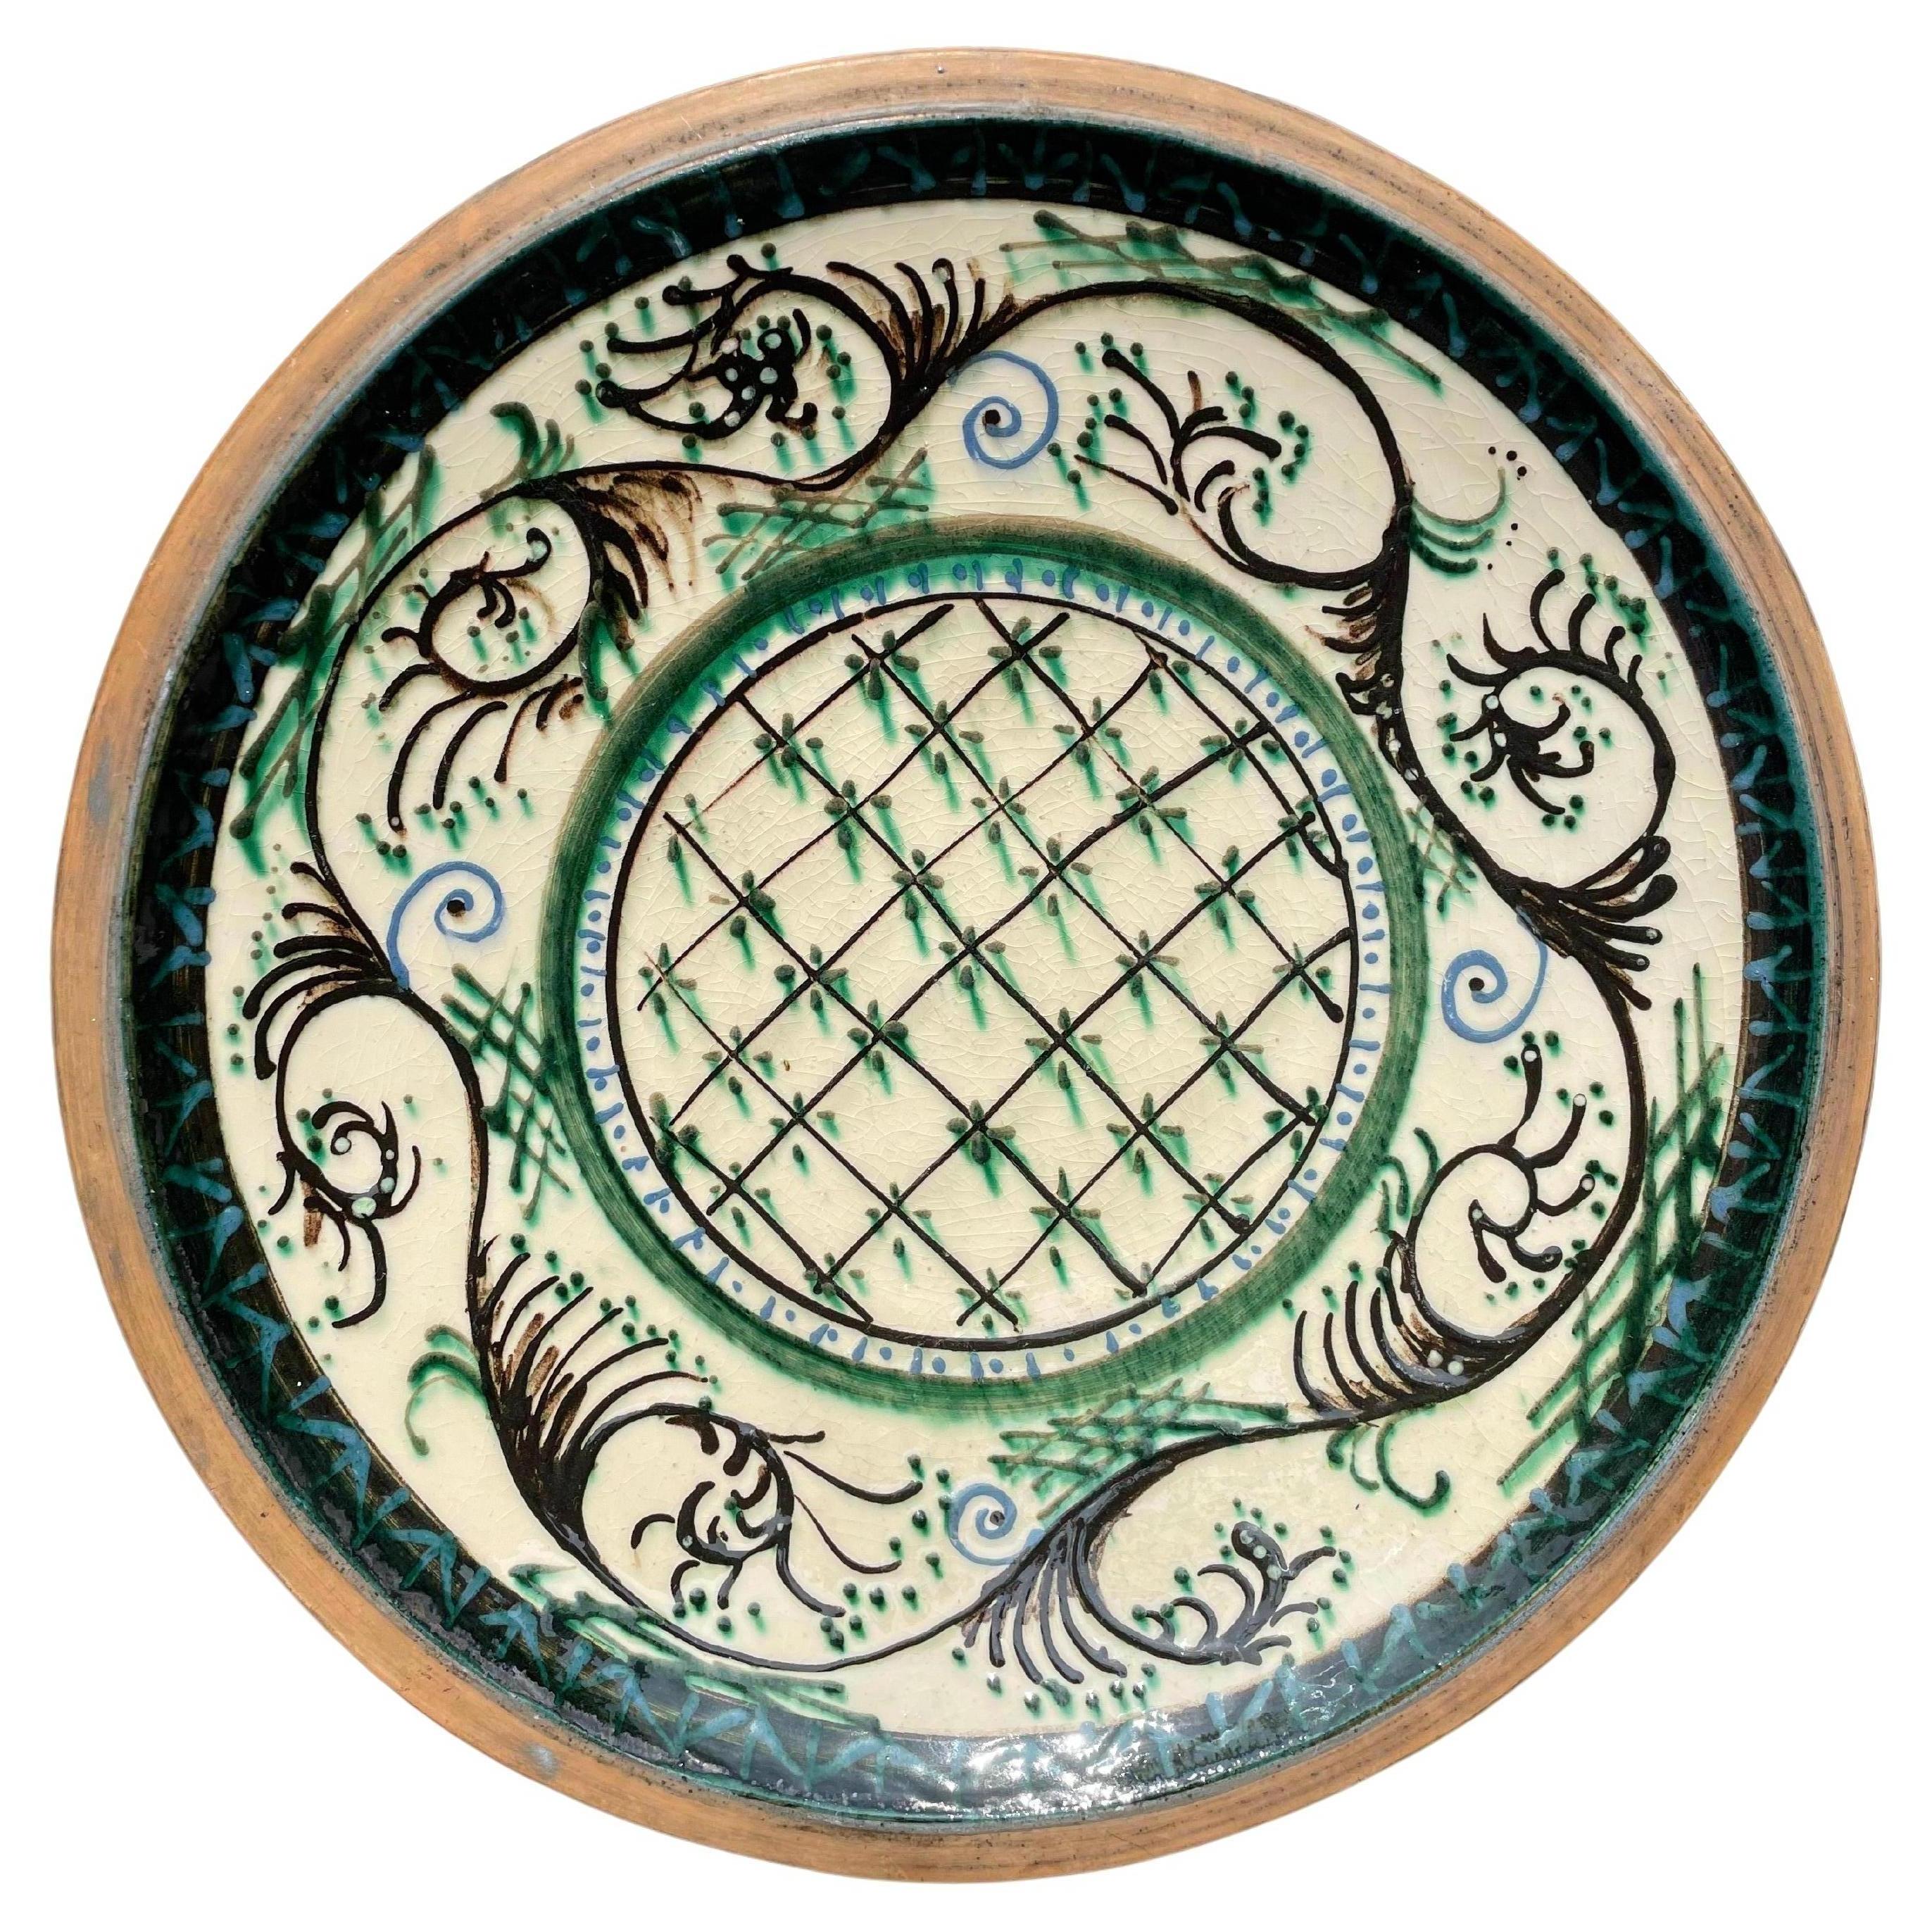 Large handmade Art Nouveau ceramic wall plate / centerpiece bowl manufactured in Denmark in the 1930s. Thick cow horn glaze applied by hand in cream, brown, blue and green colors. Two holes on the back for wall hanging. Signed under base. Beautiful